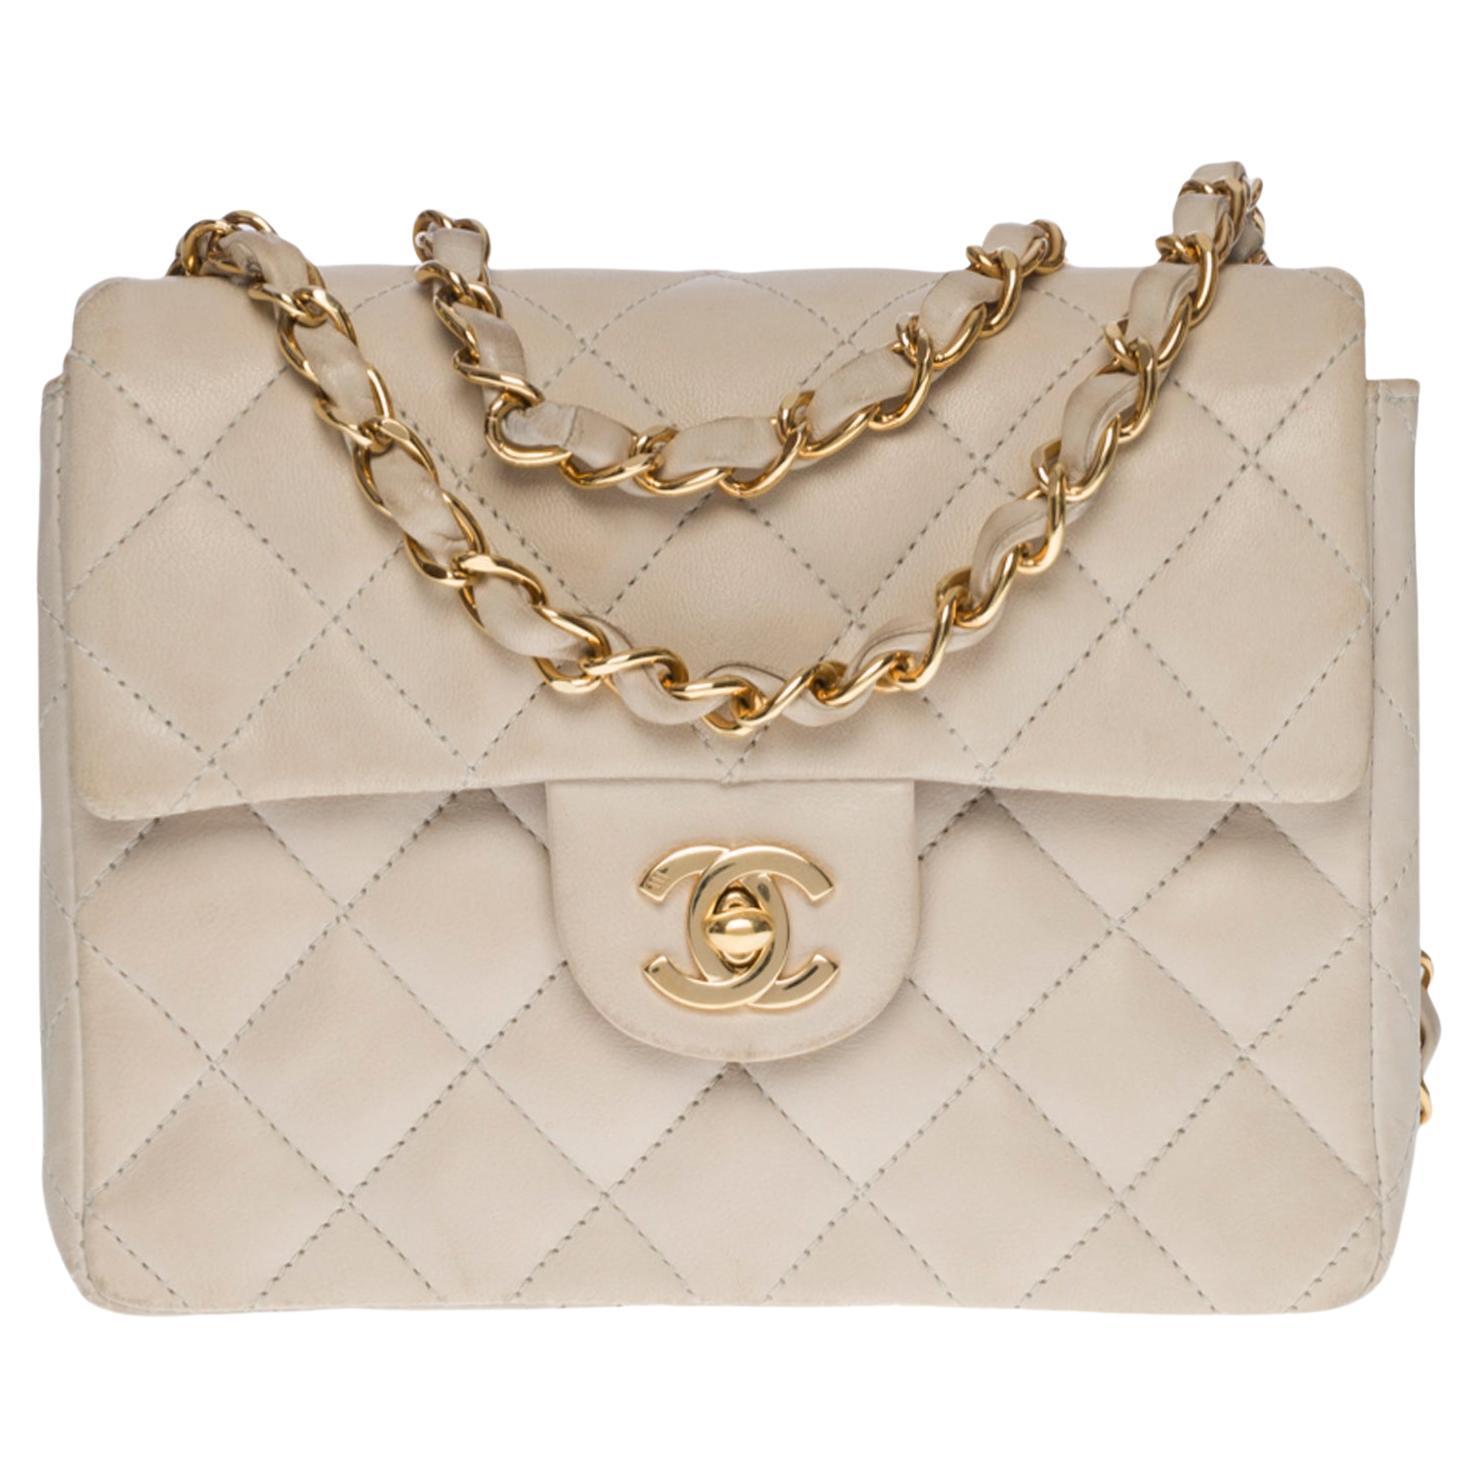 Chanel Mini Timeless flap shoulder bag in ecru quilted lambskin,  GHW